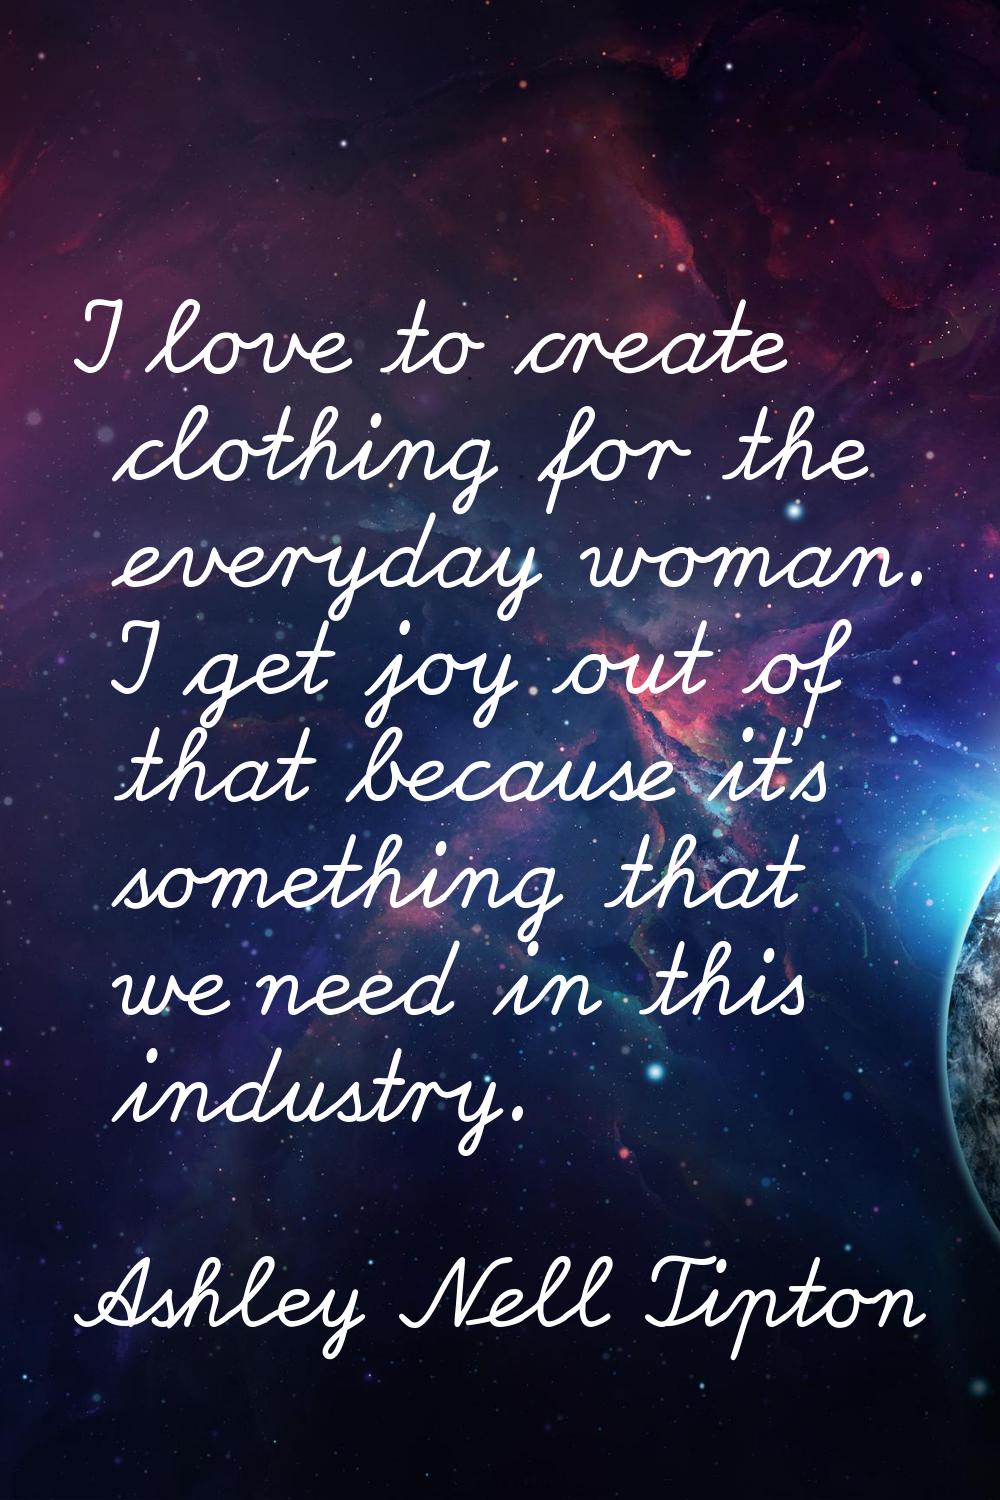 I love to create clothing for the everyday woman. I get joy out of that because it's something that